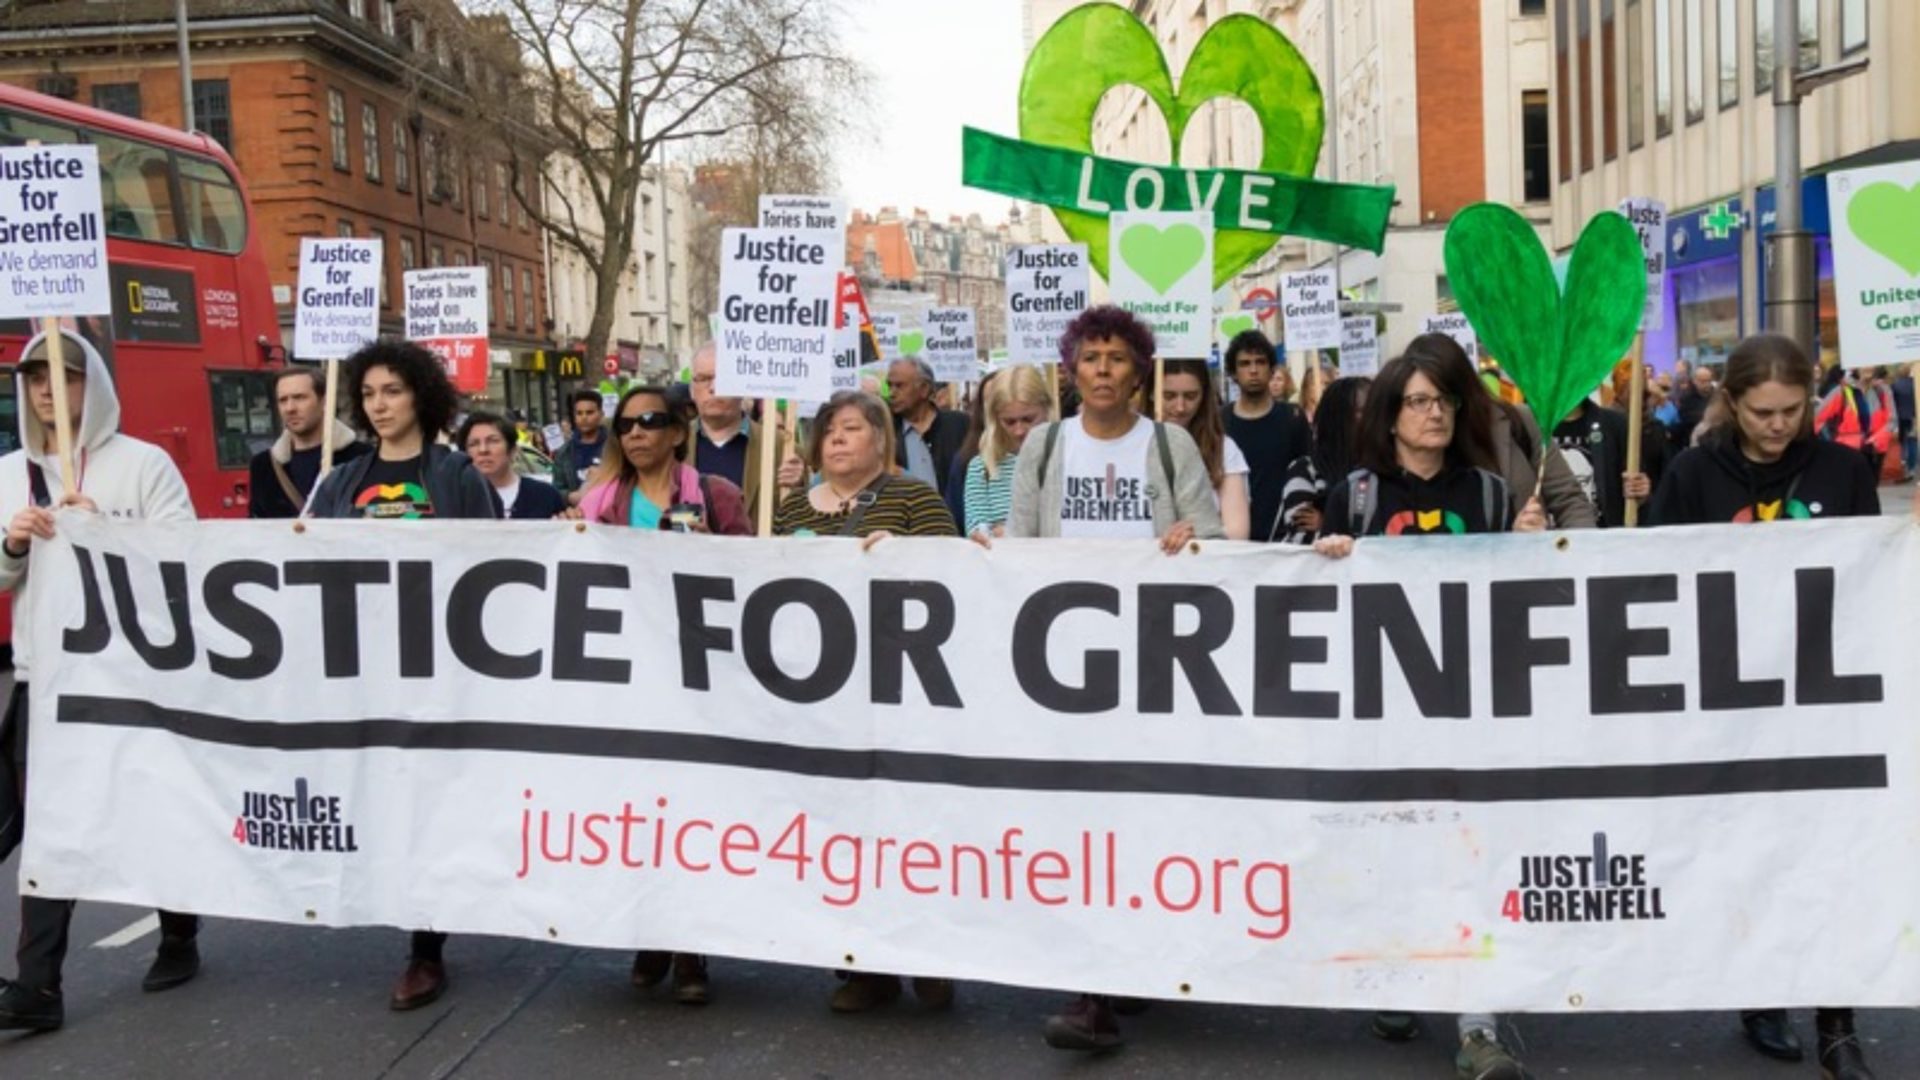 Rydon Grenfell - A group of people marching behind a banner that says 'Justice for Grenfell'